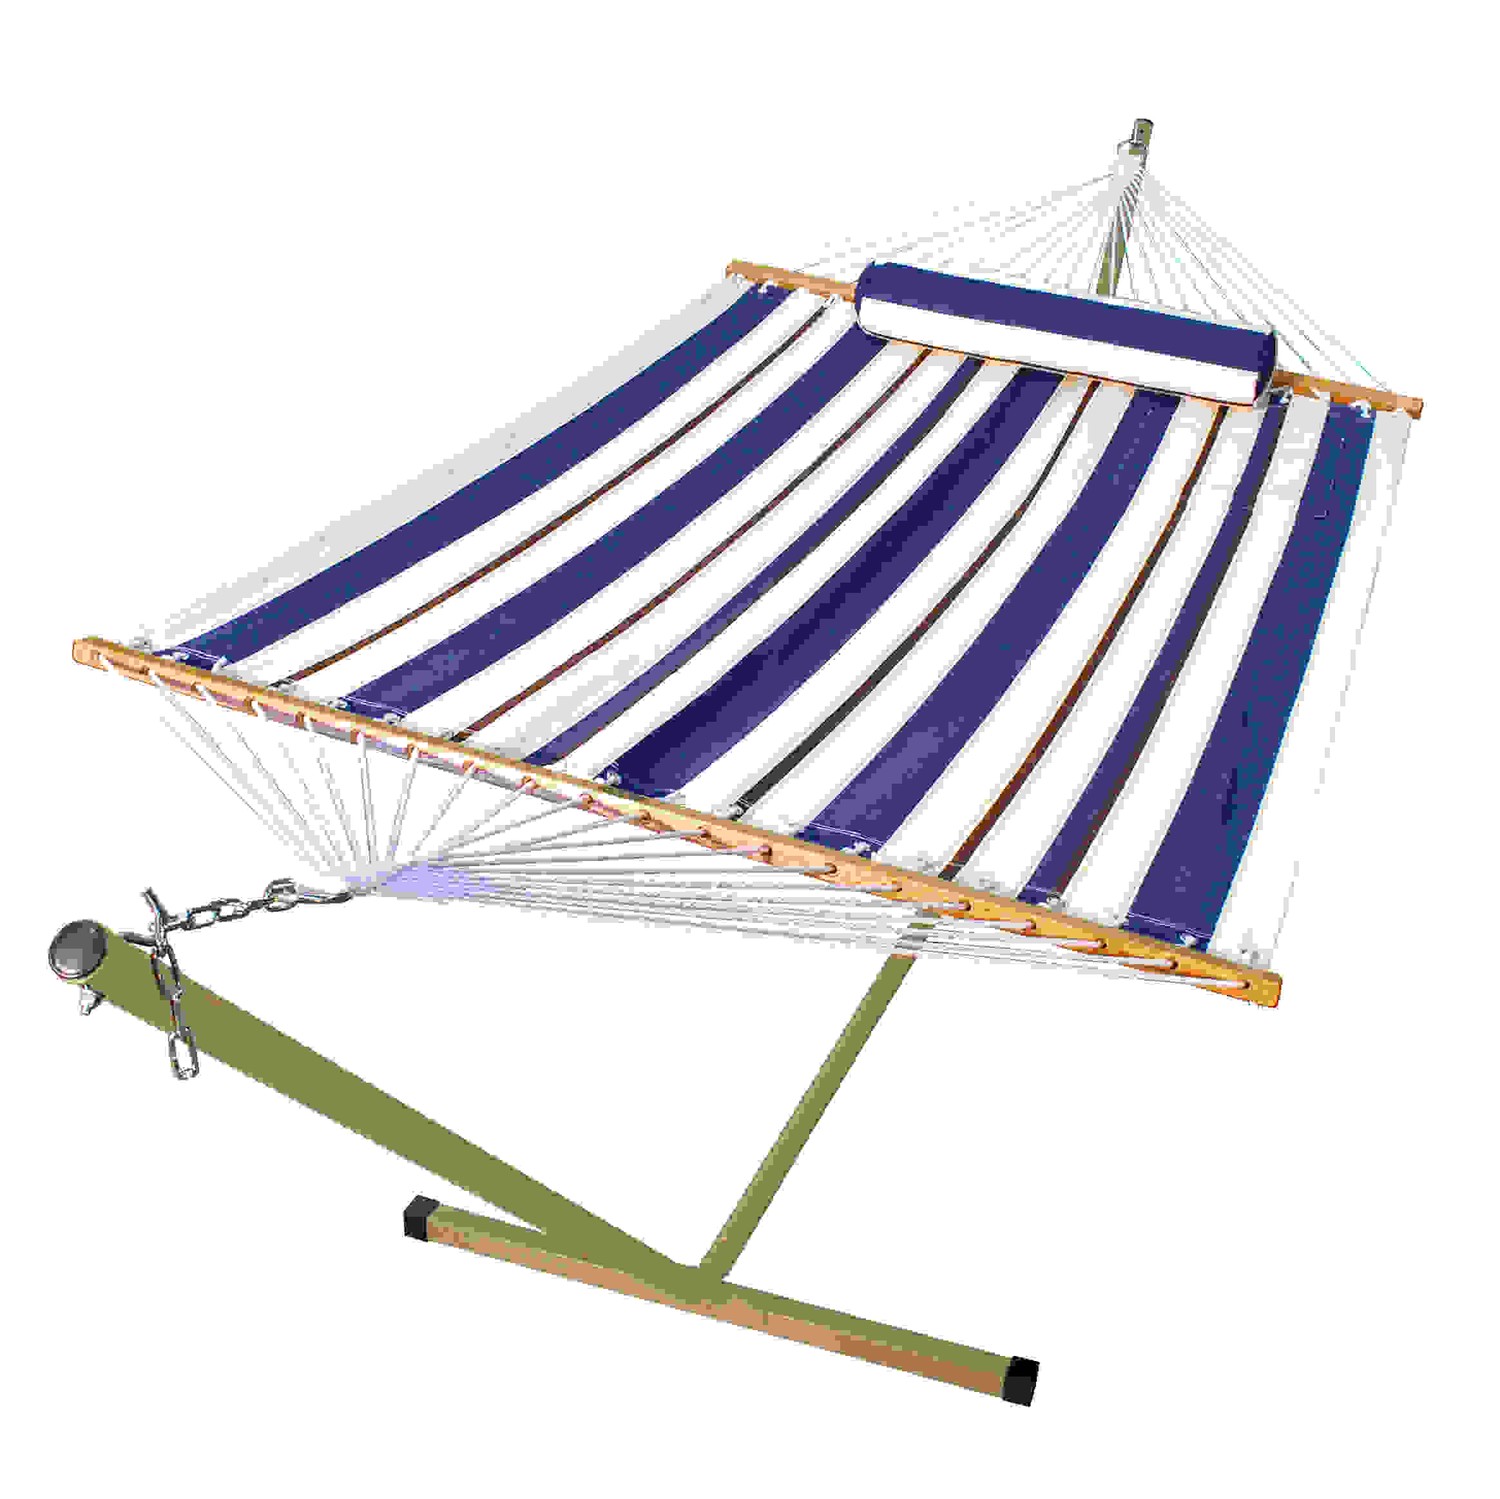 12' Fabric Hammock, Pillow, and Stand Combination